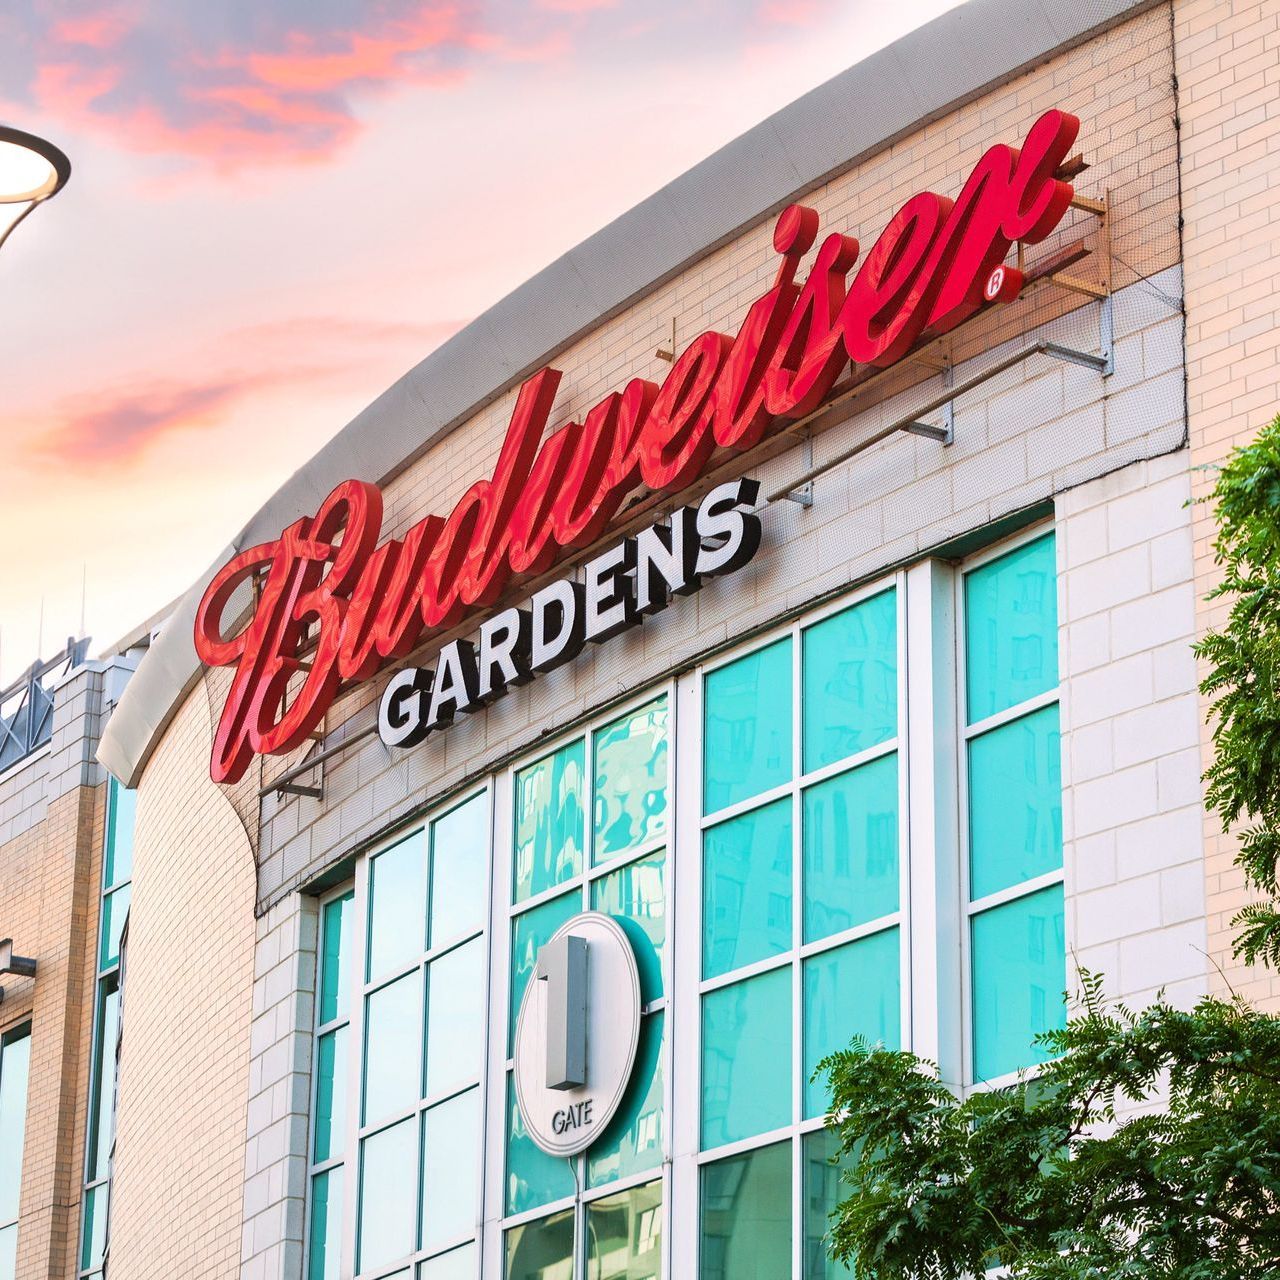 budweiser gardens is written on the side of a building